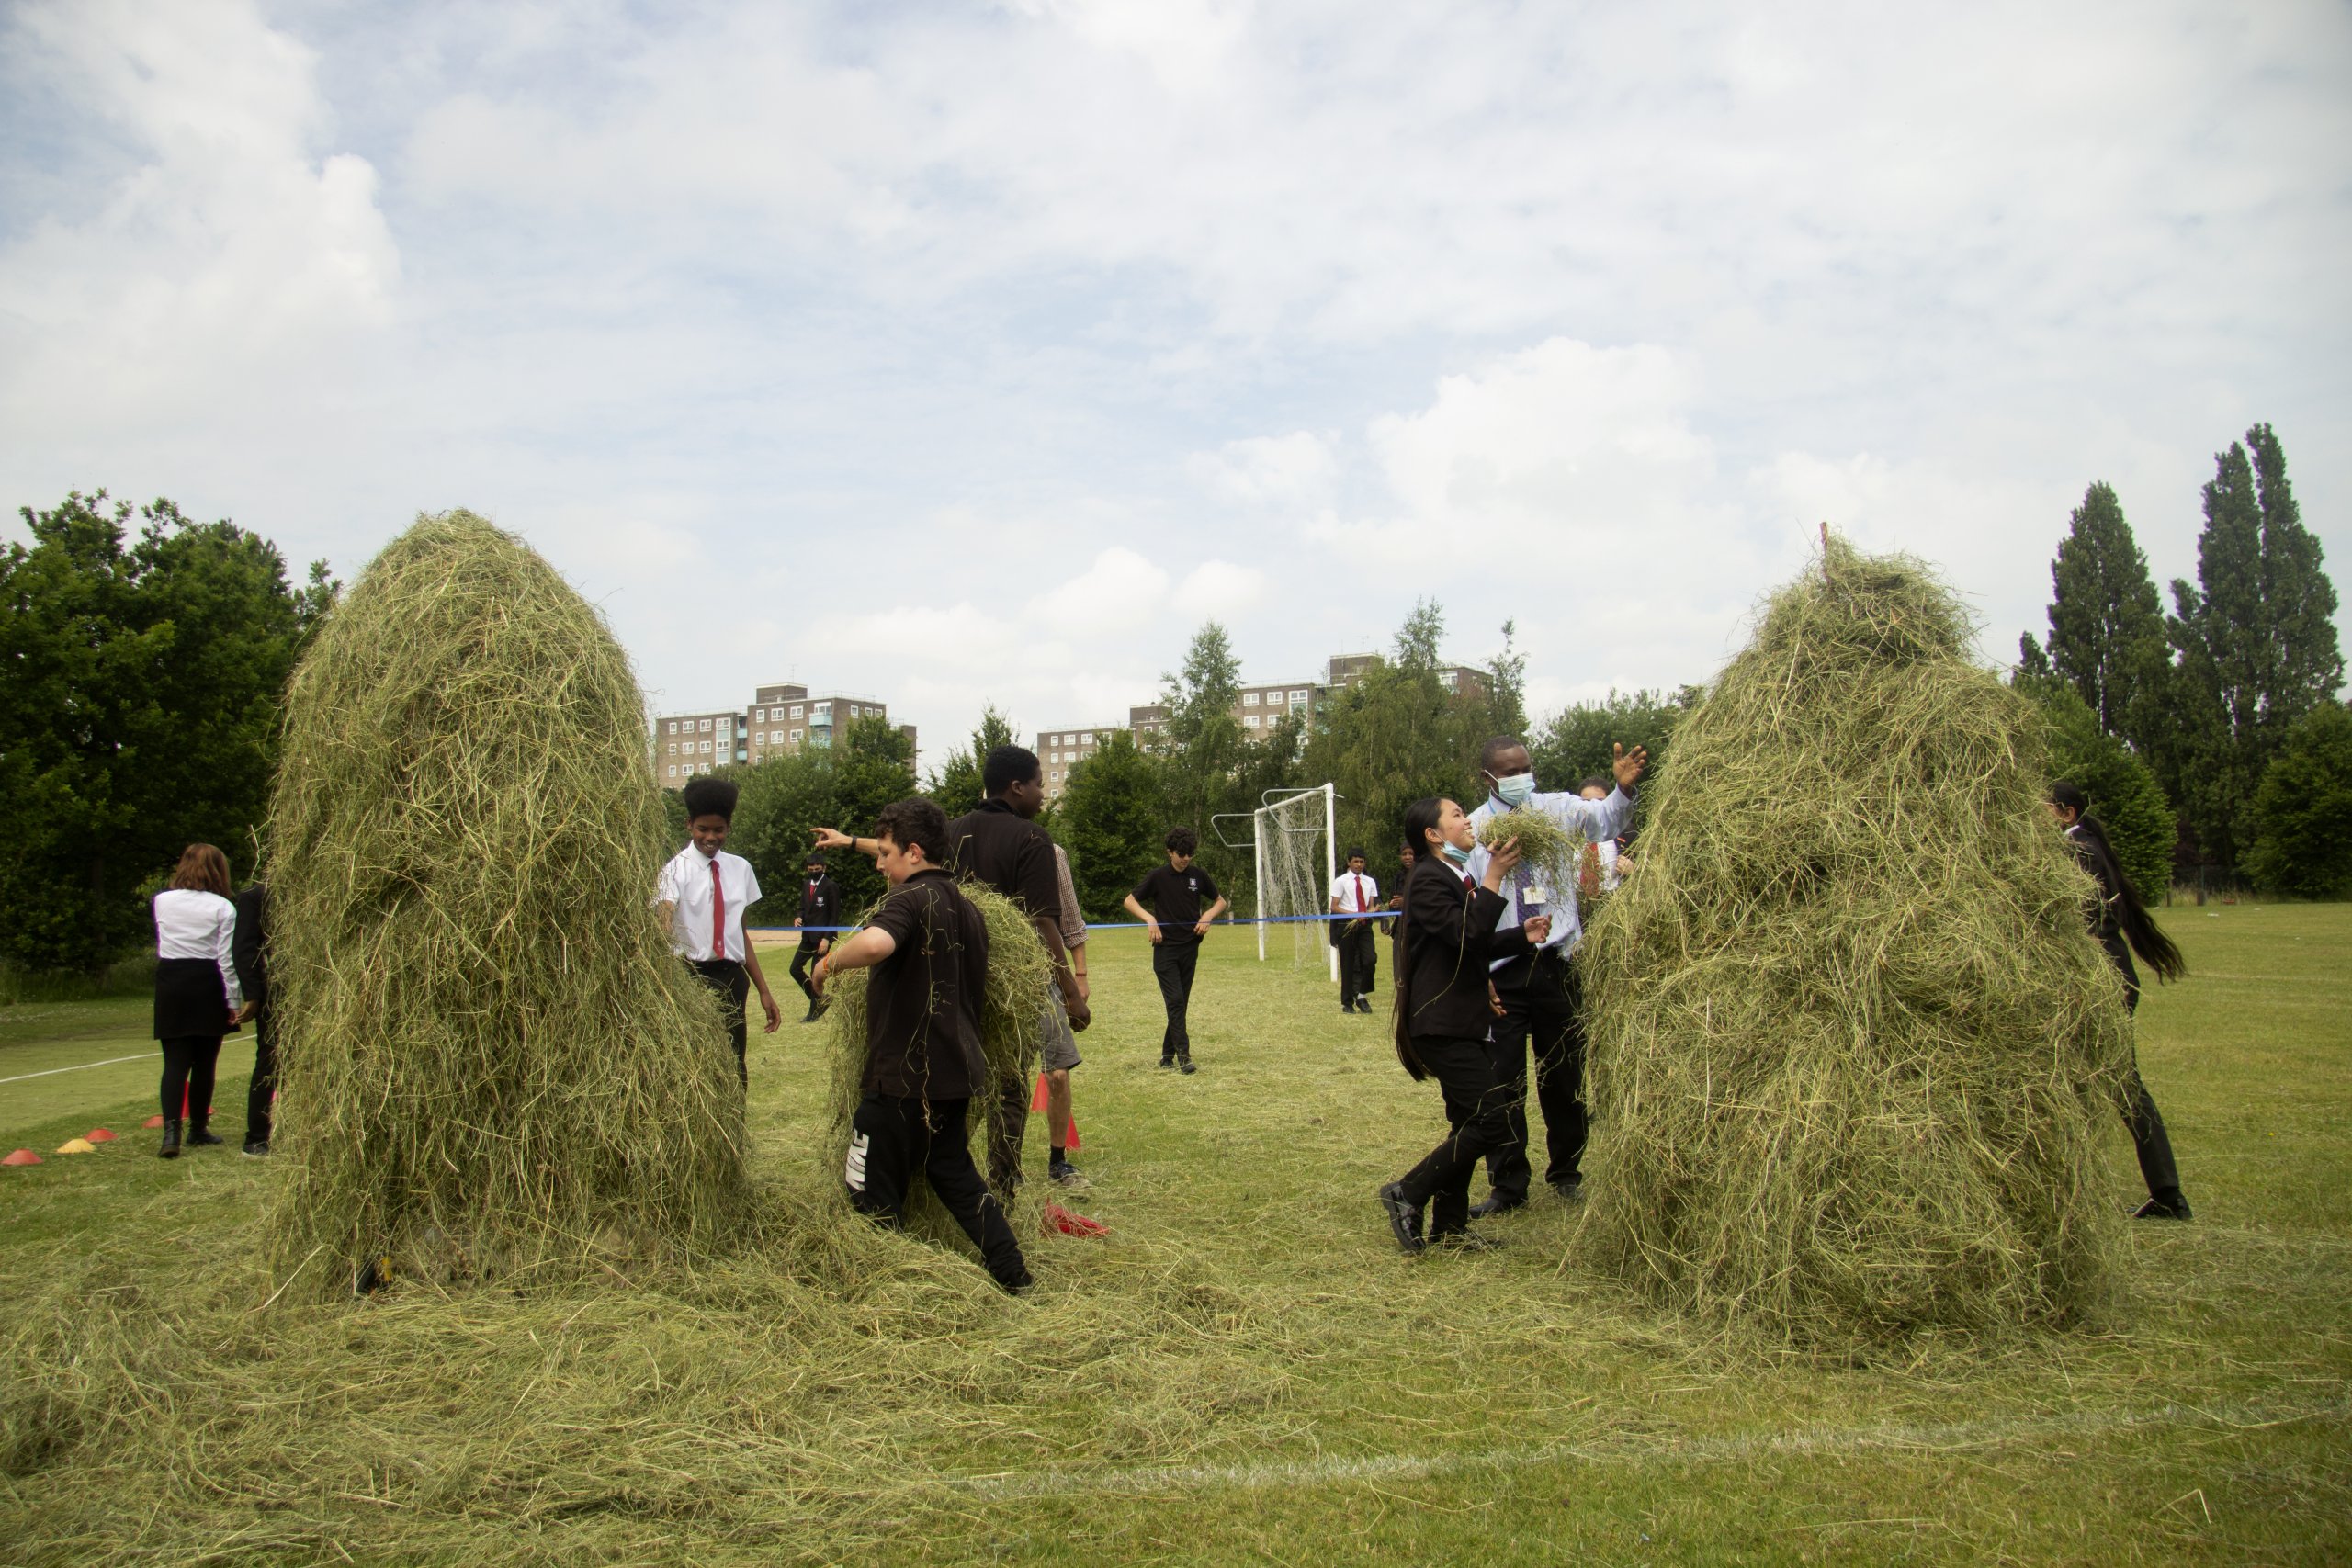 Children from the local community haymaking with Luke from Meanwood Valley Farm. There are two bales of hay either side of the photo. They are tall and surrounded by children.